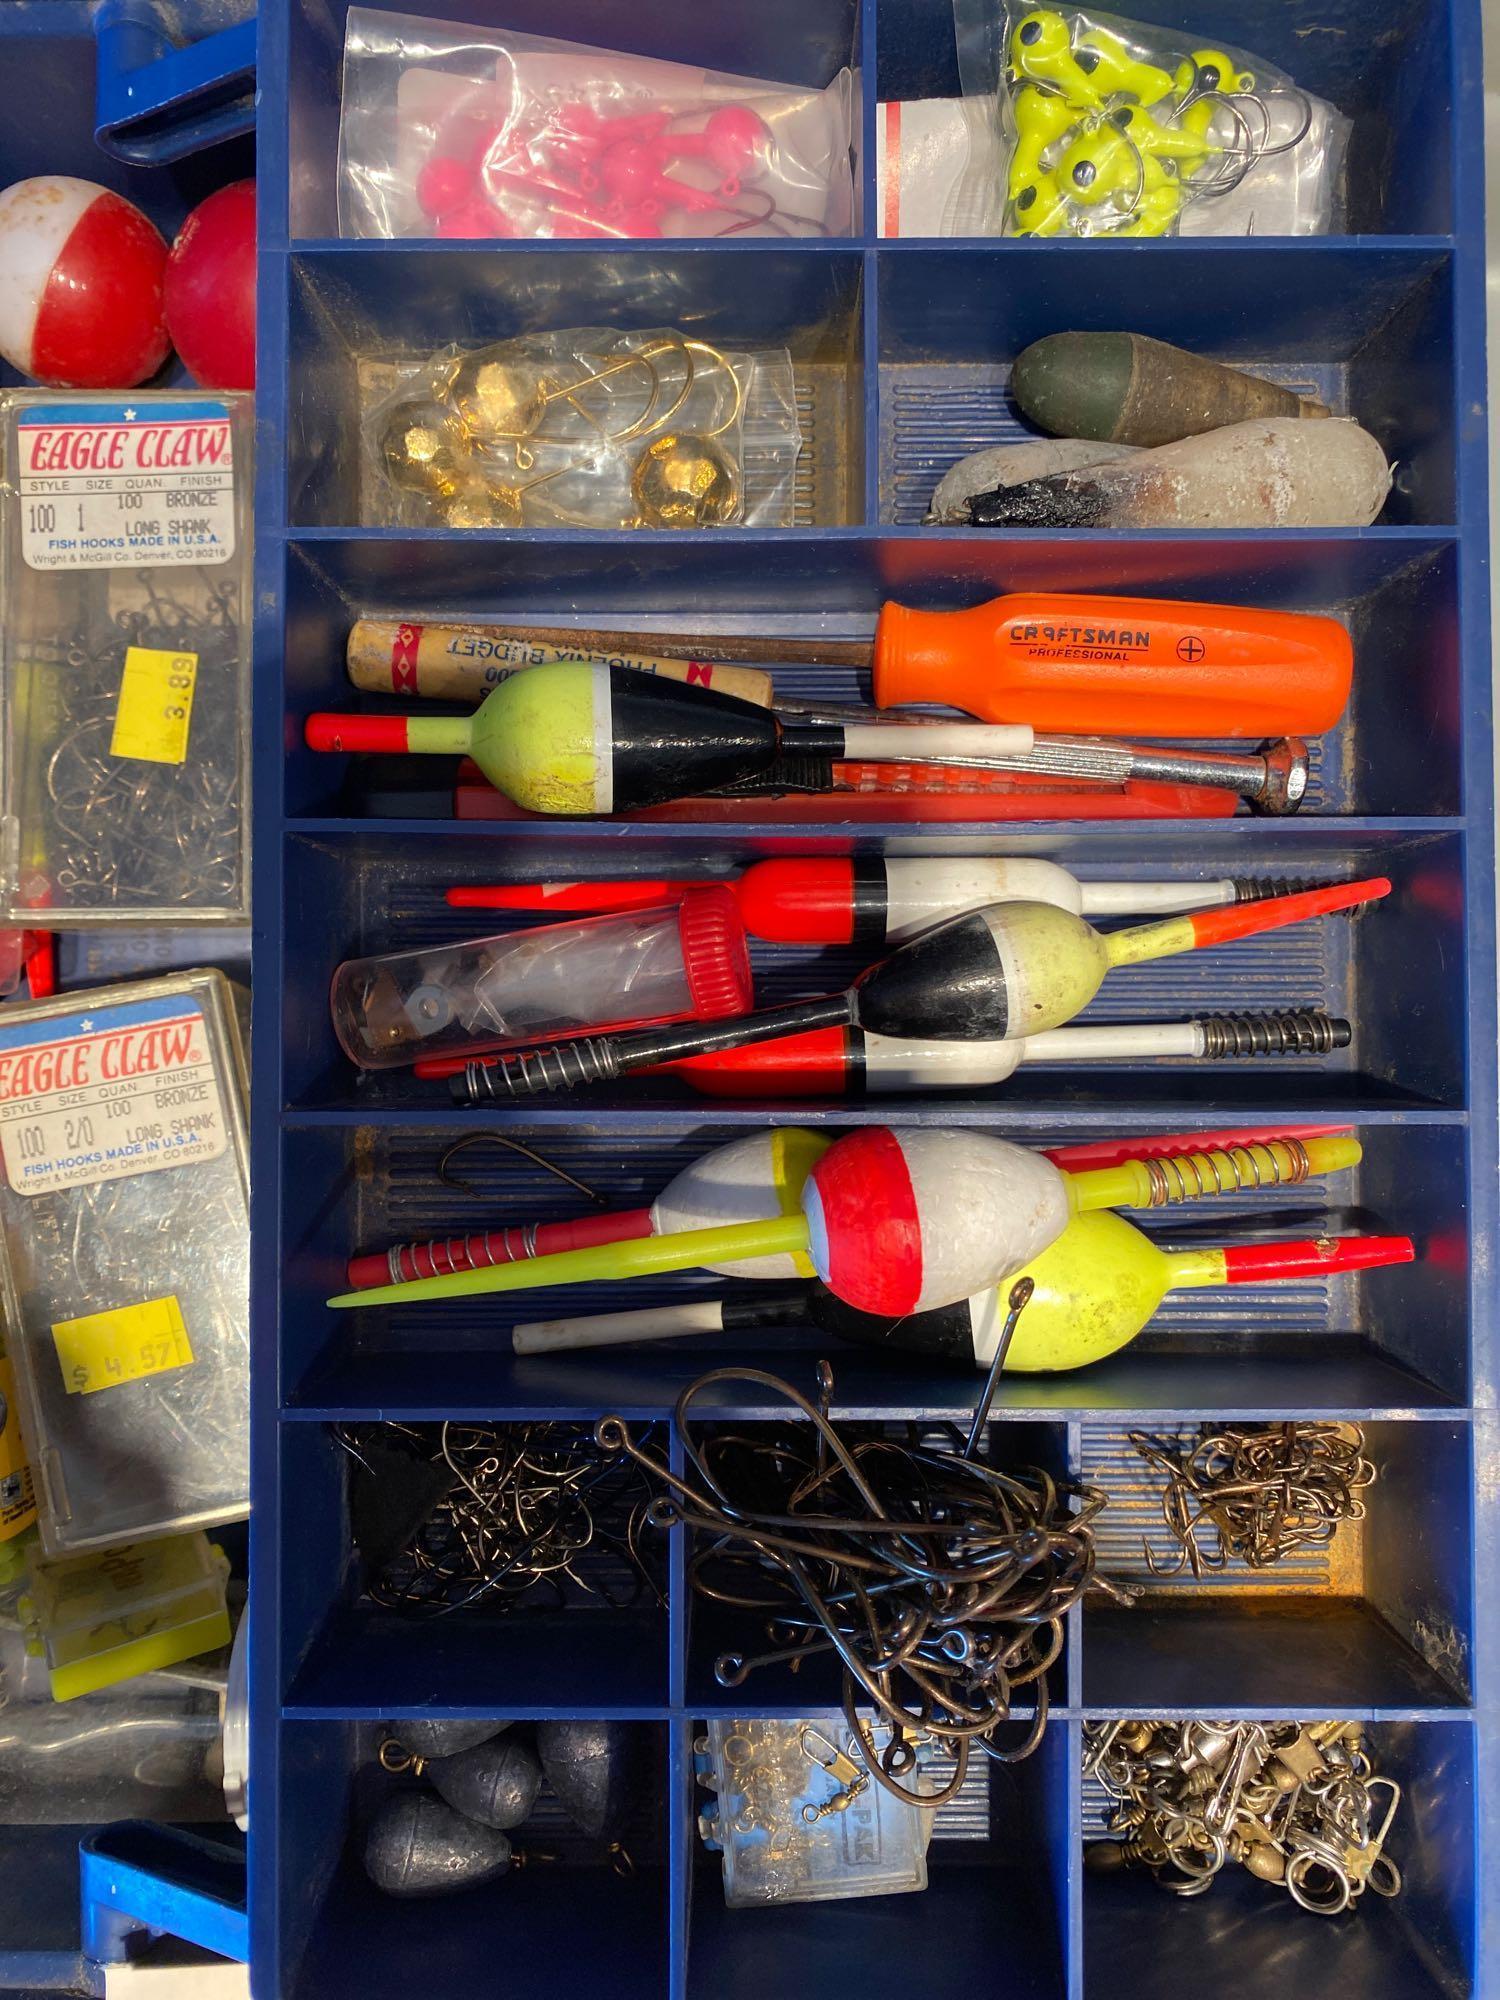 Full tackle box and floating marker buoys